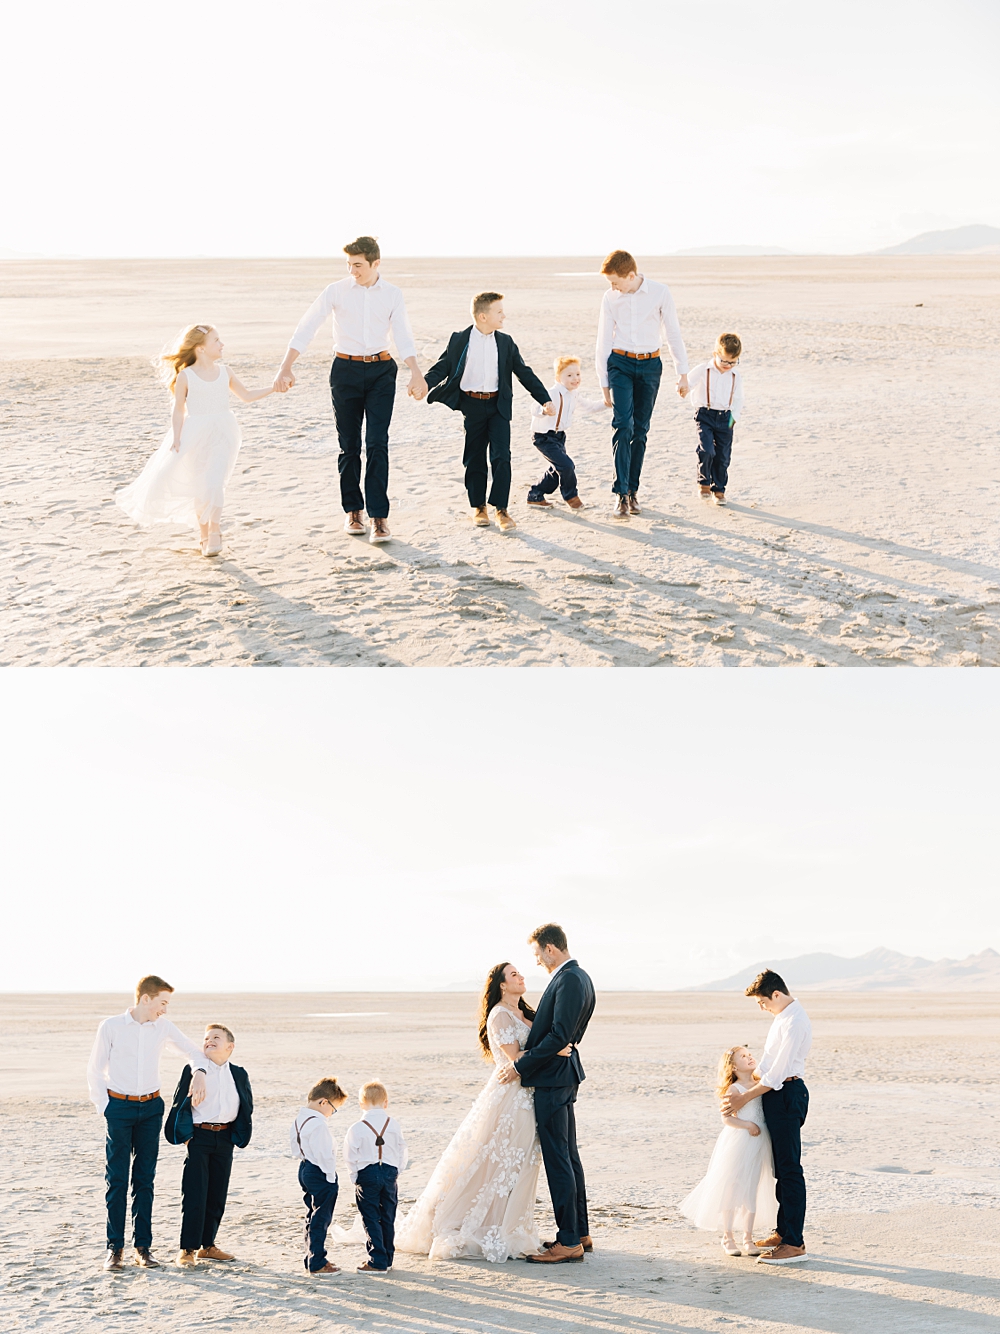 Salt Flats Family Pictures | Formal Family Pictures Inspo